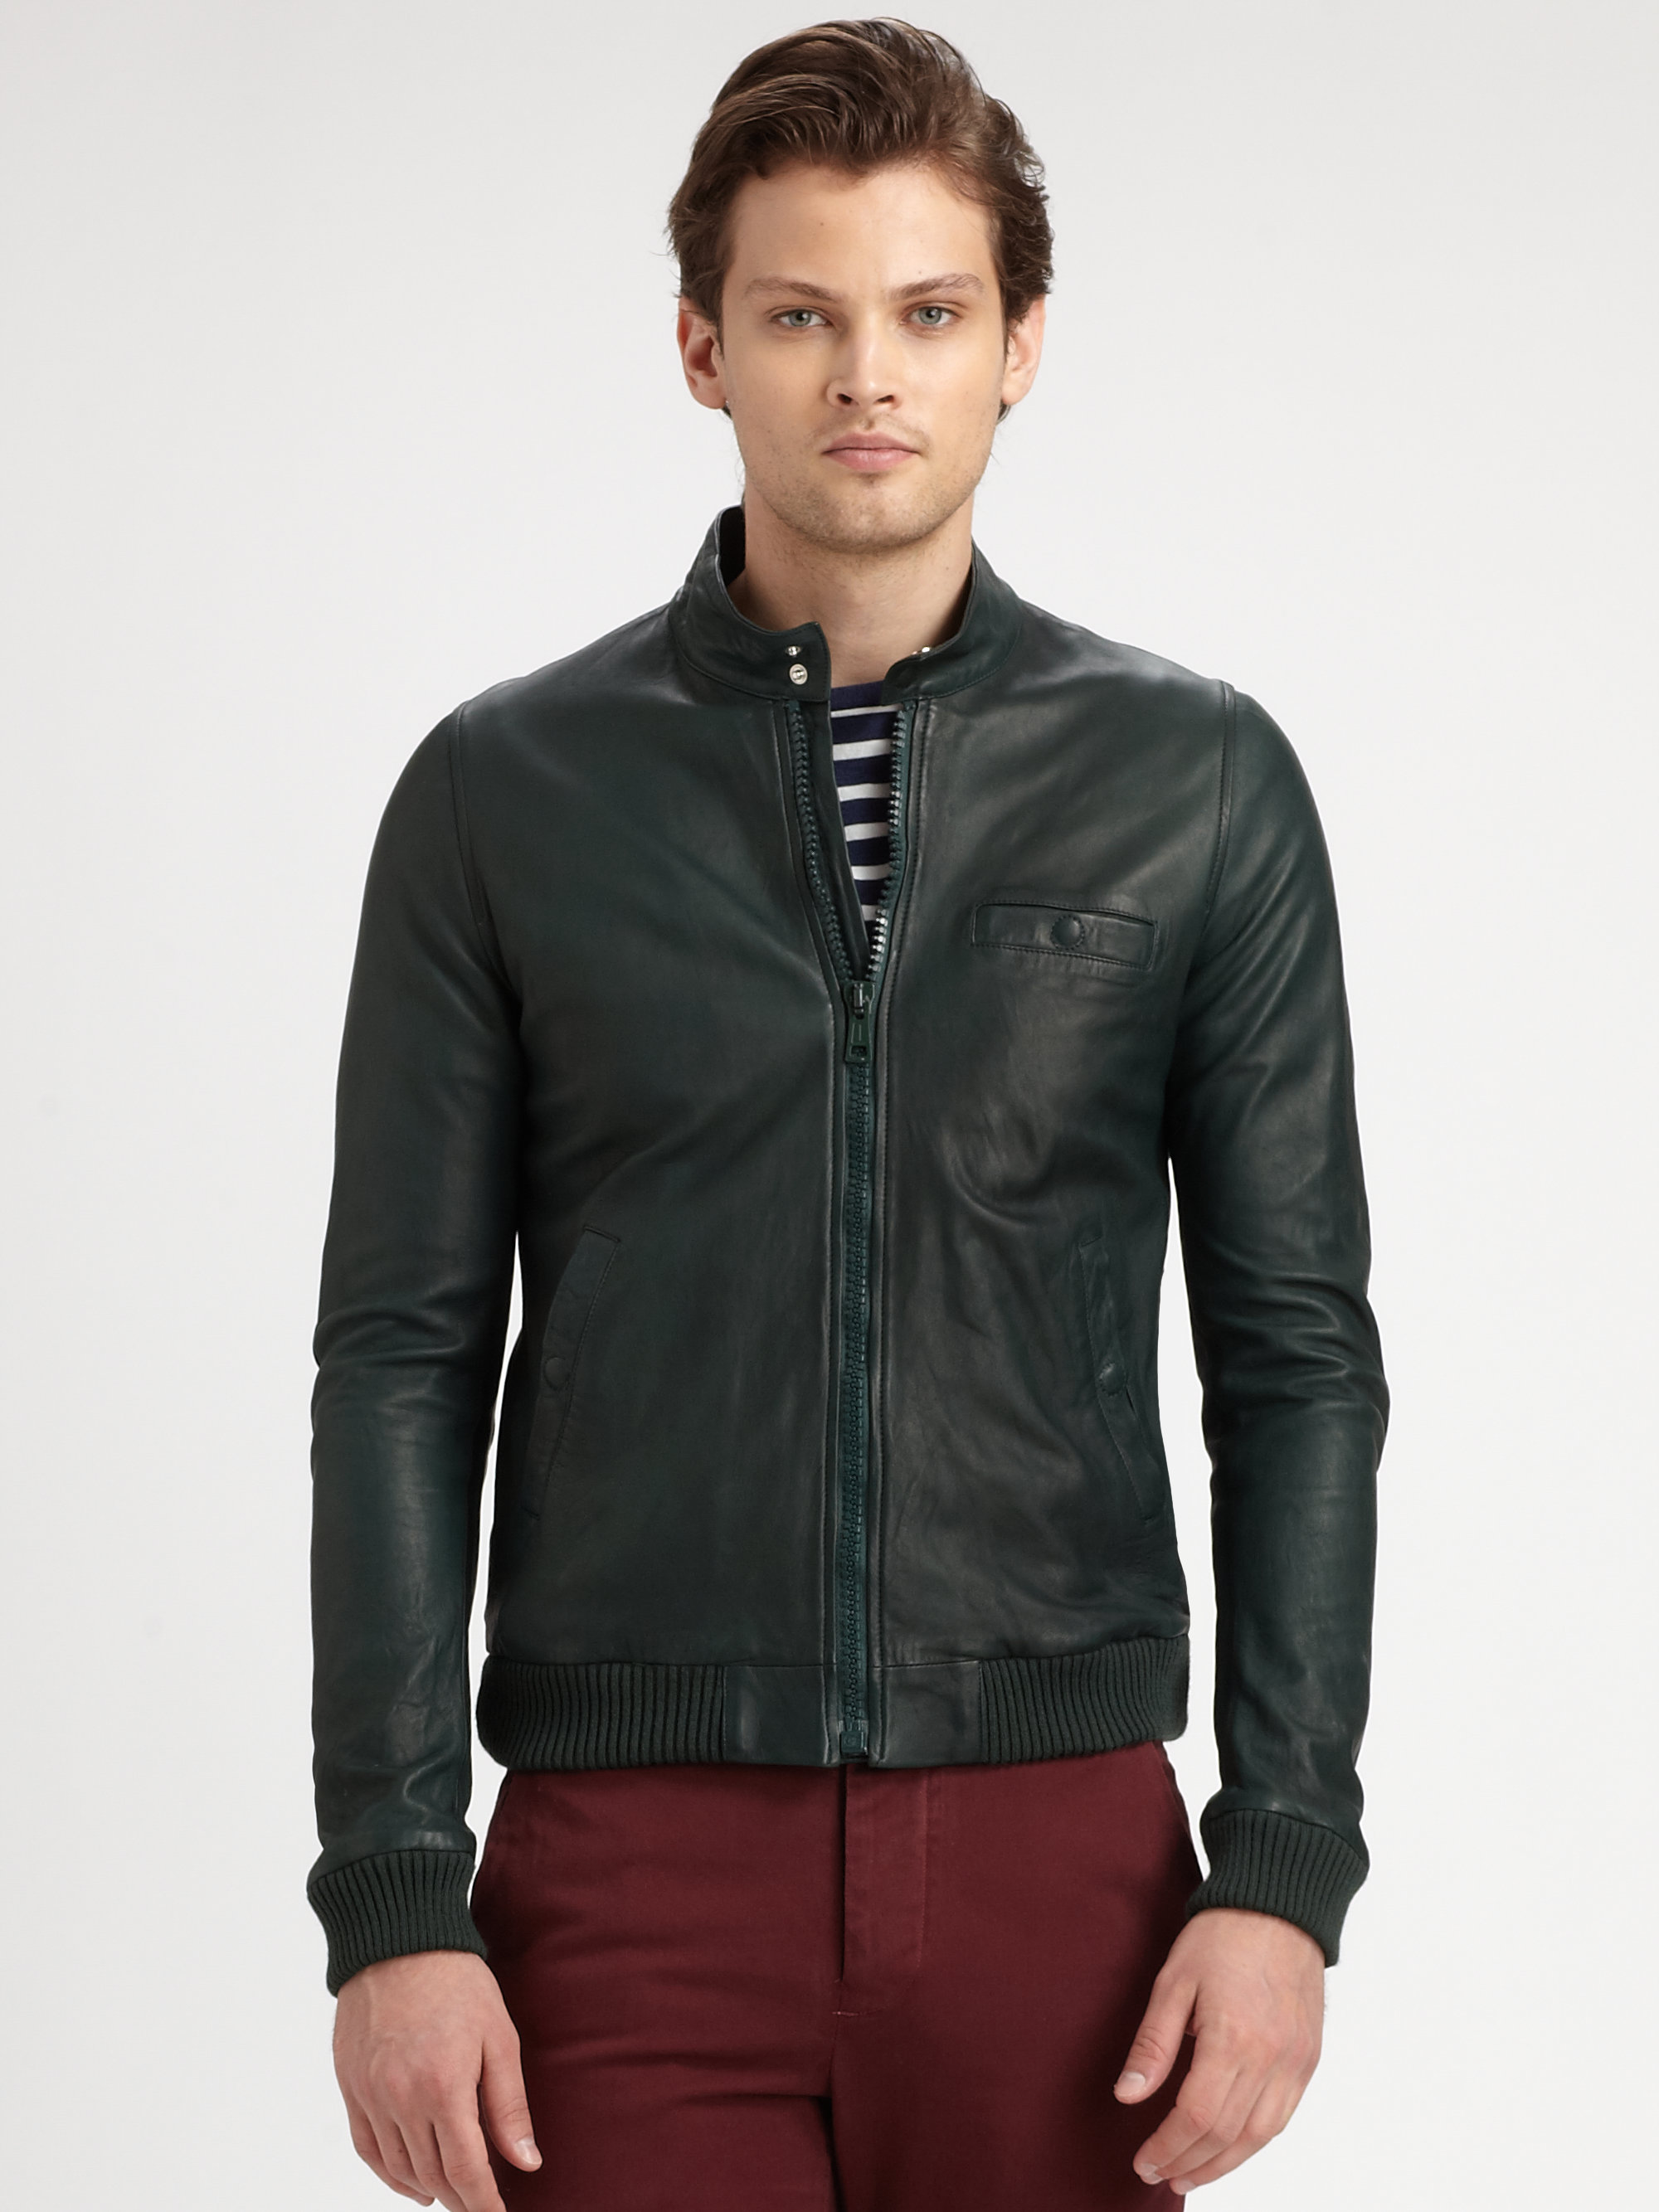 Download Lyst - Band Of Outsiders Leather Harrington Jacket in ...